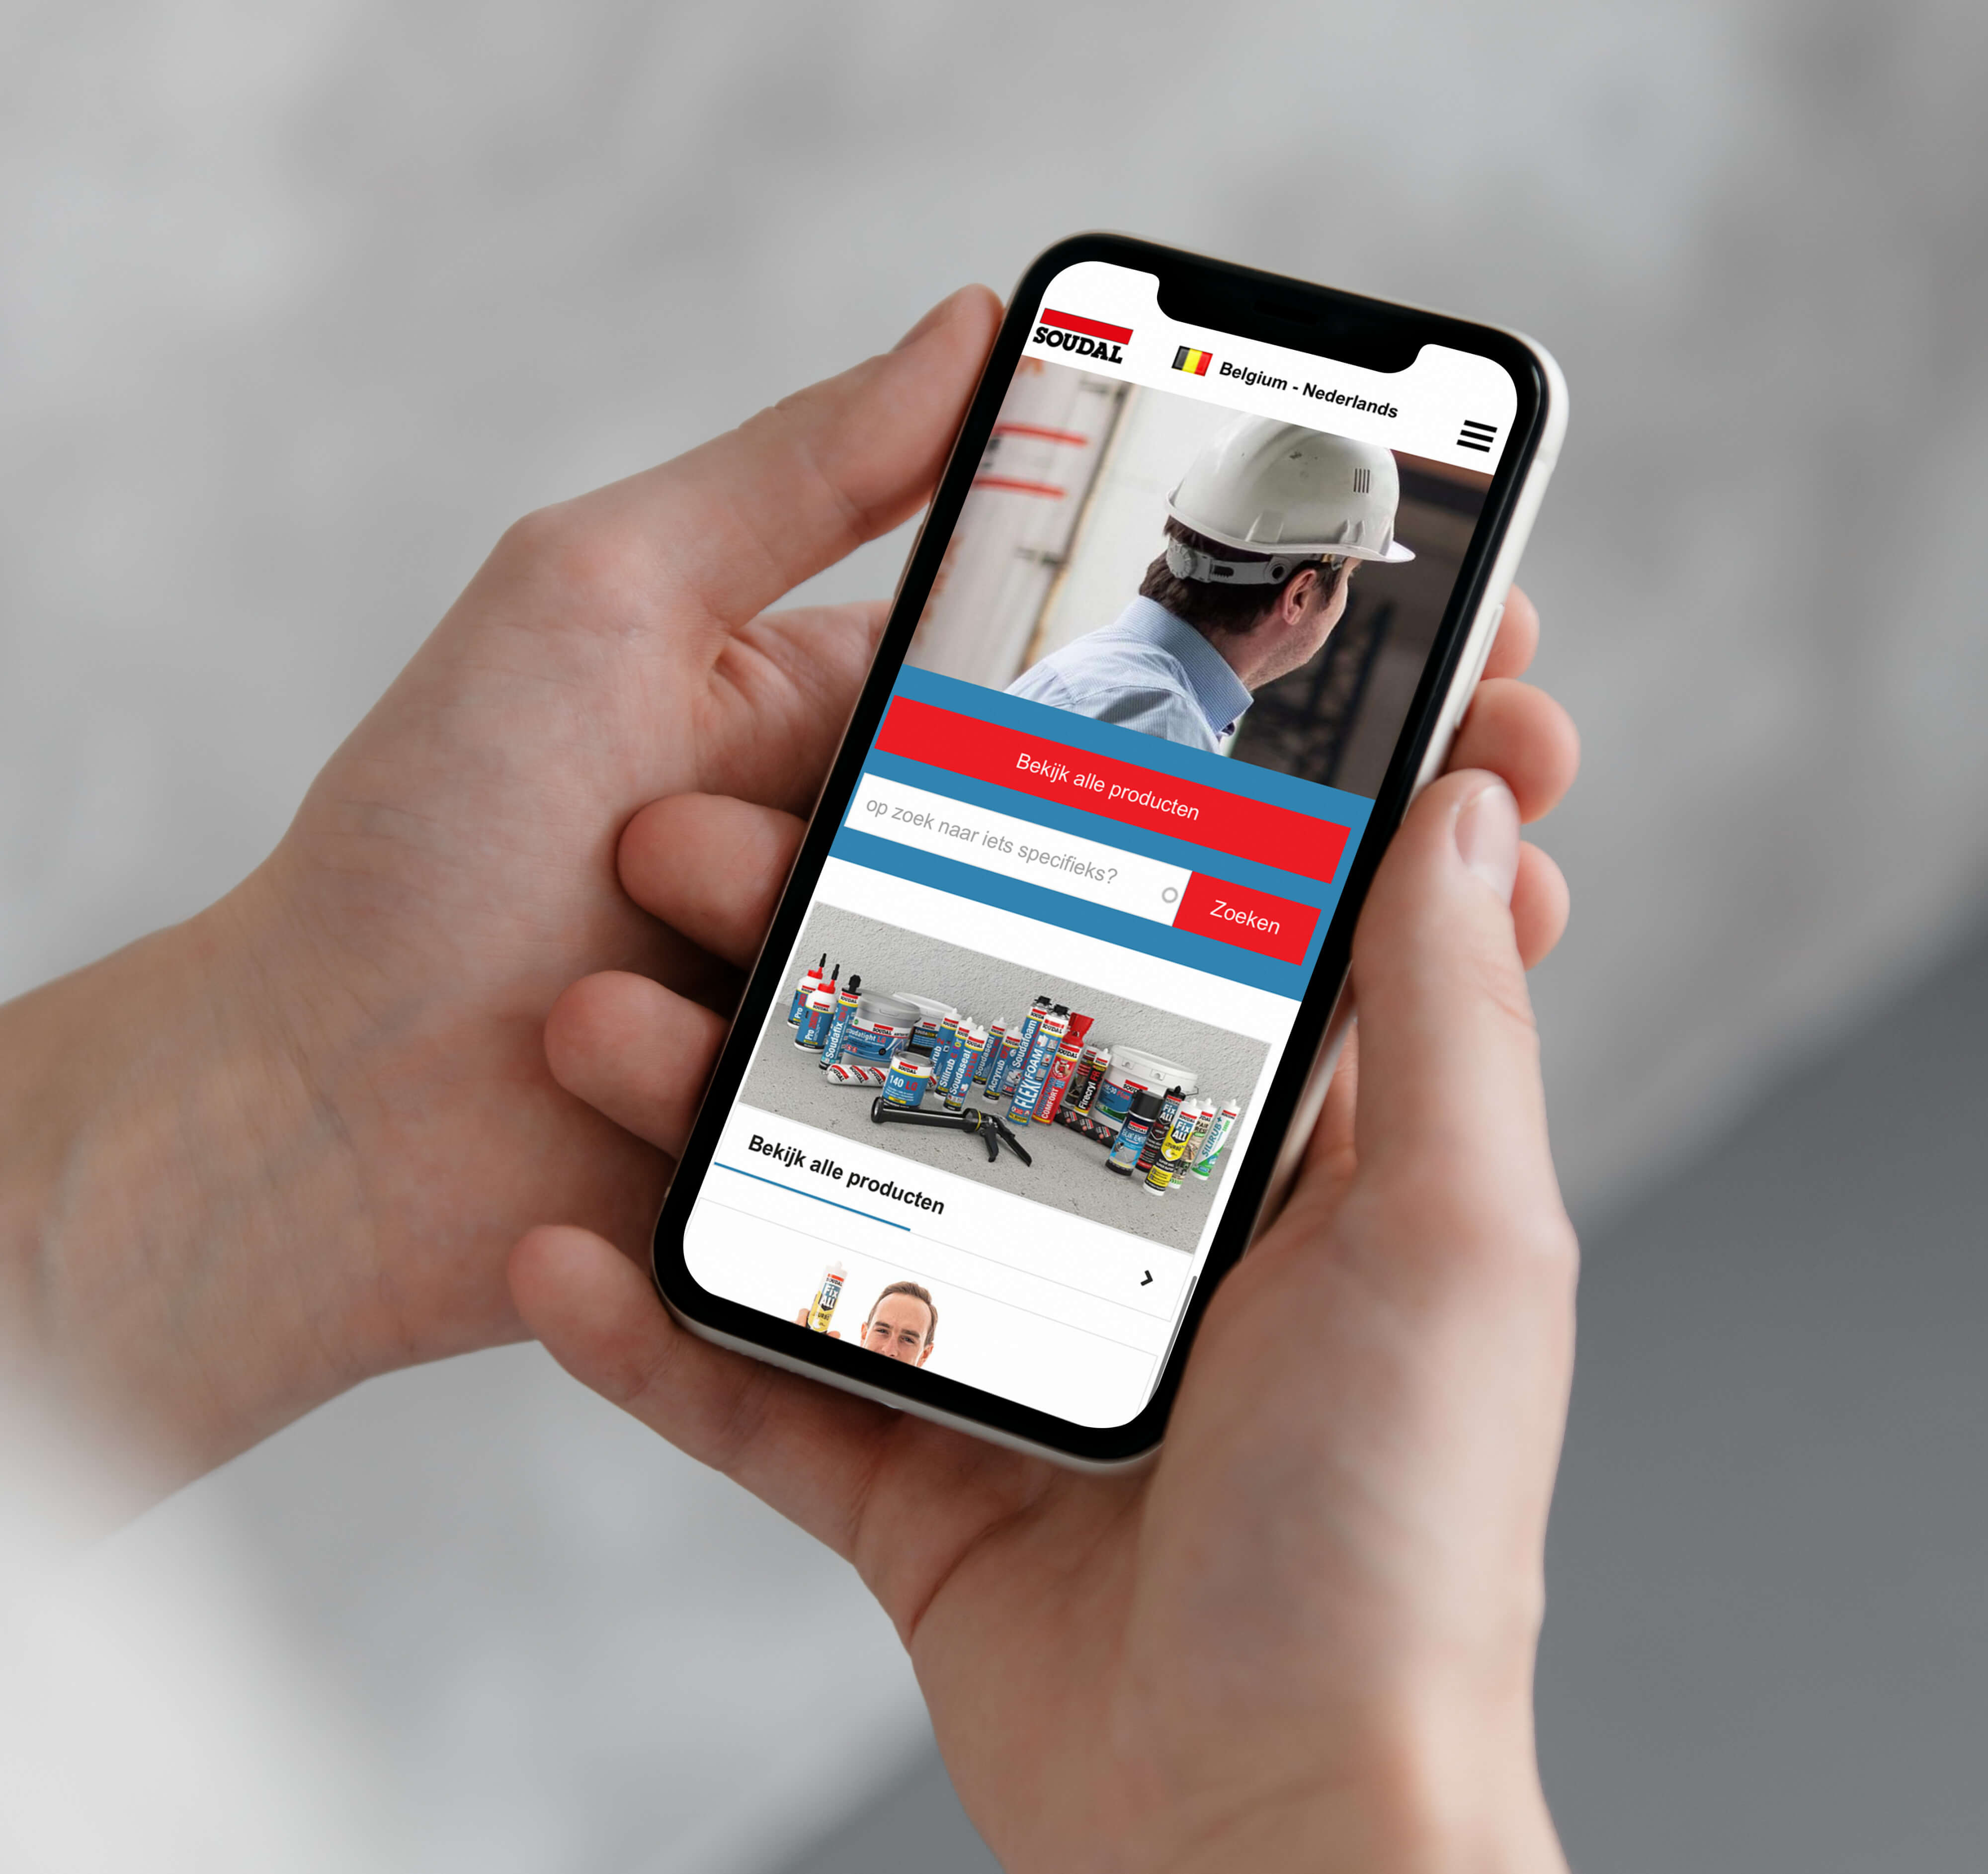 Soudal homepage mobile while hand holding phone